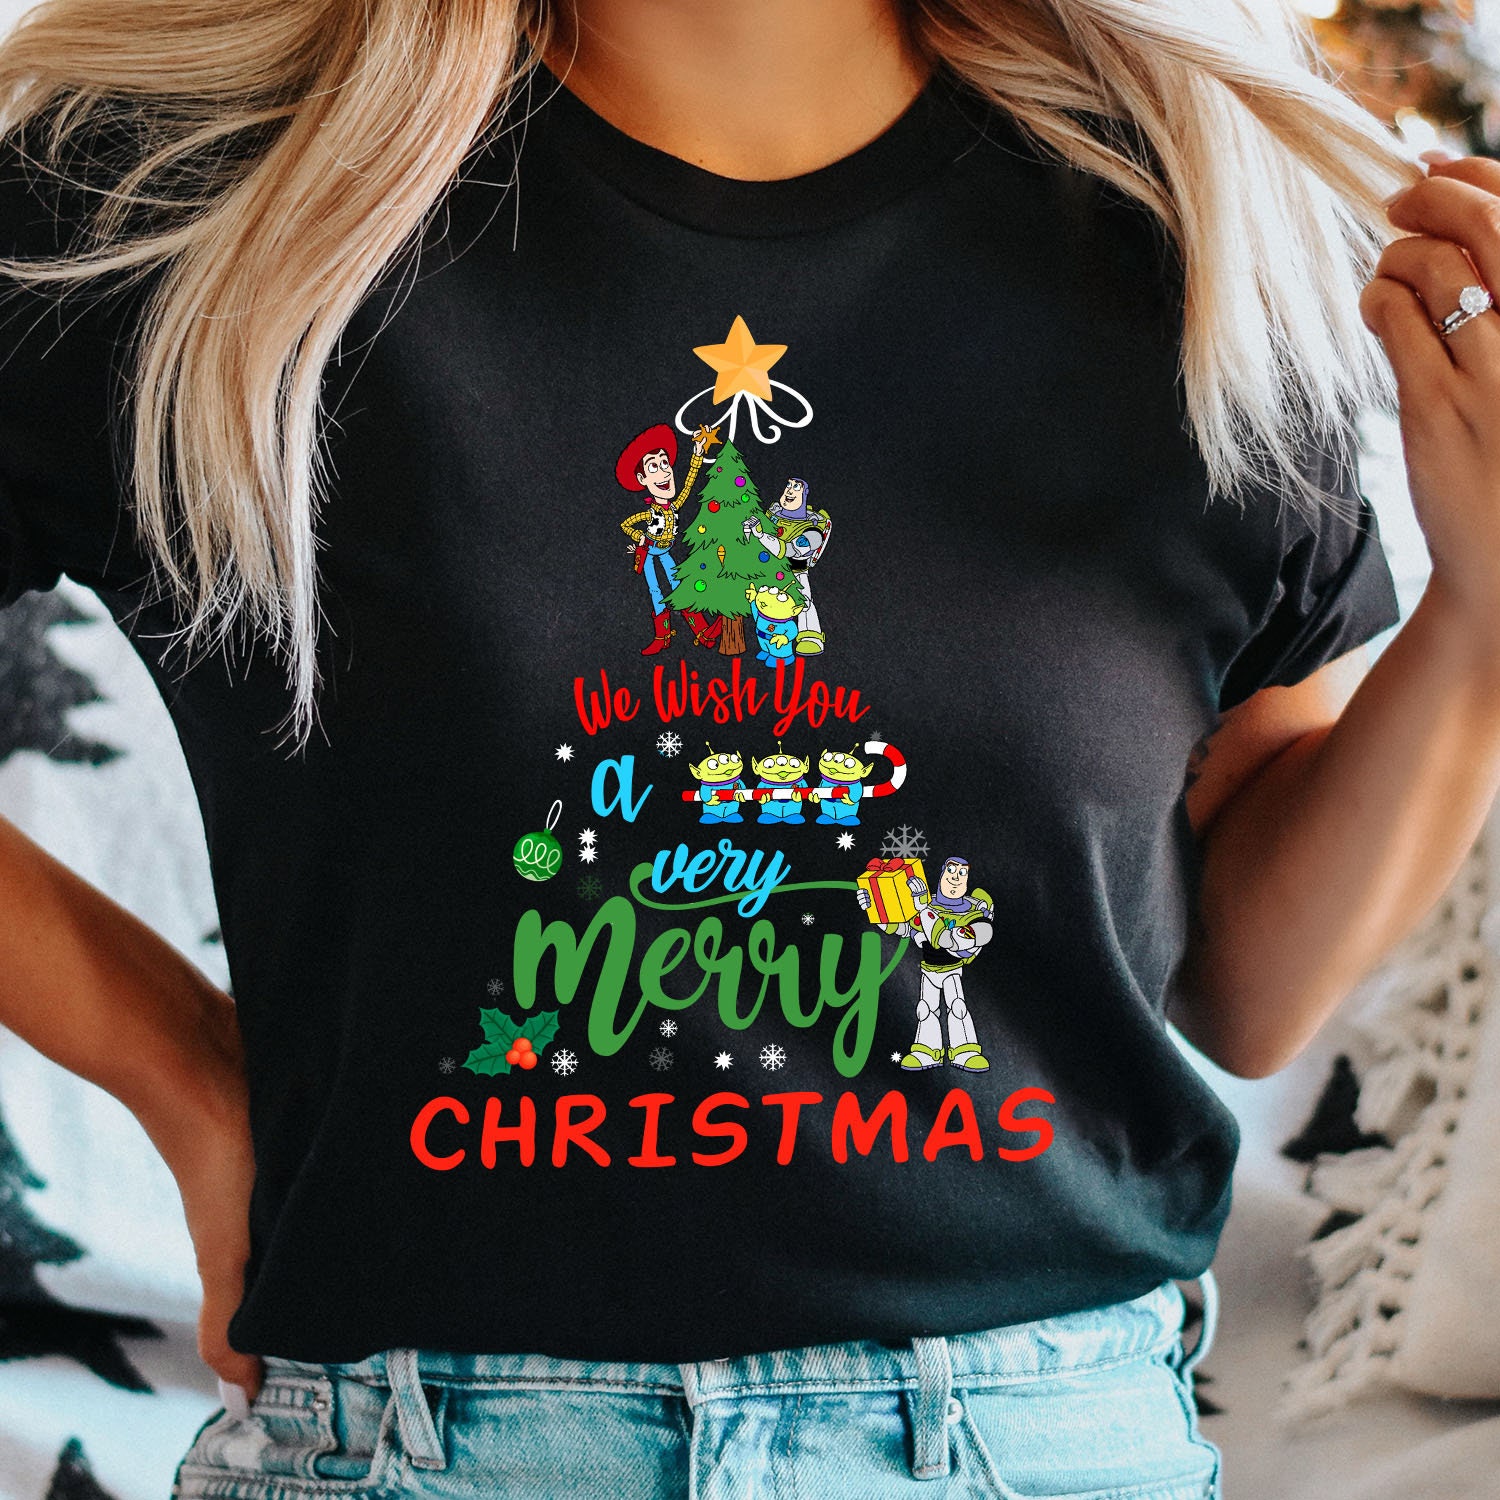 Discover We Wish You A Very Merry Christmas, Toy Story Christmas T-Shirt